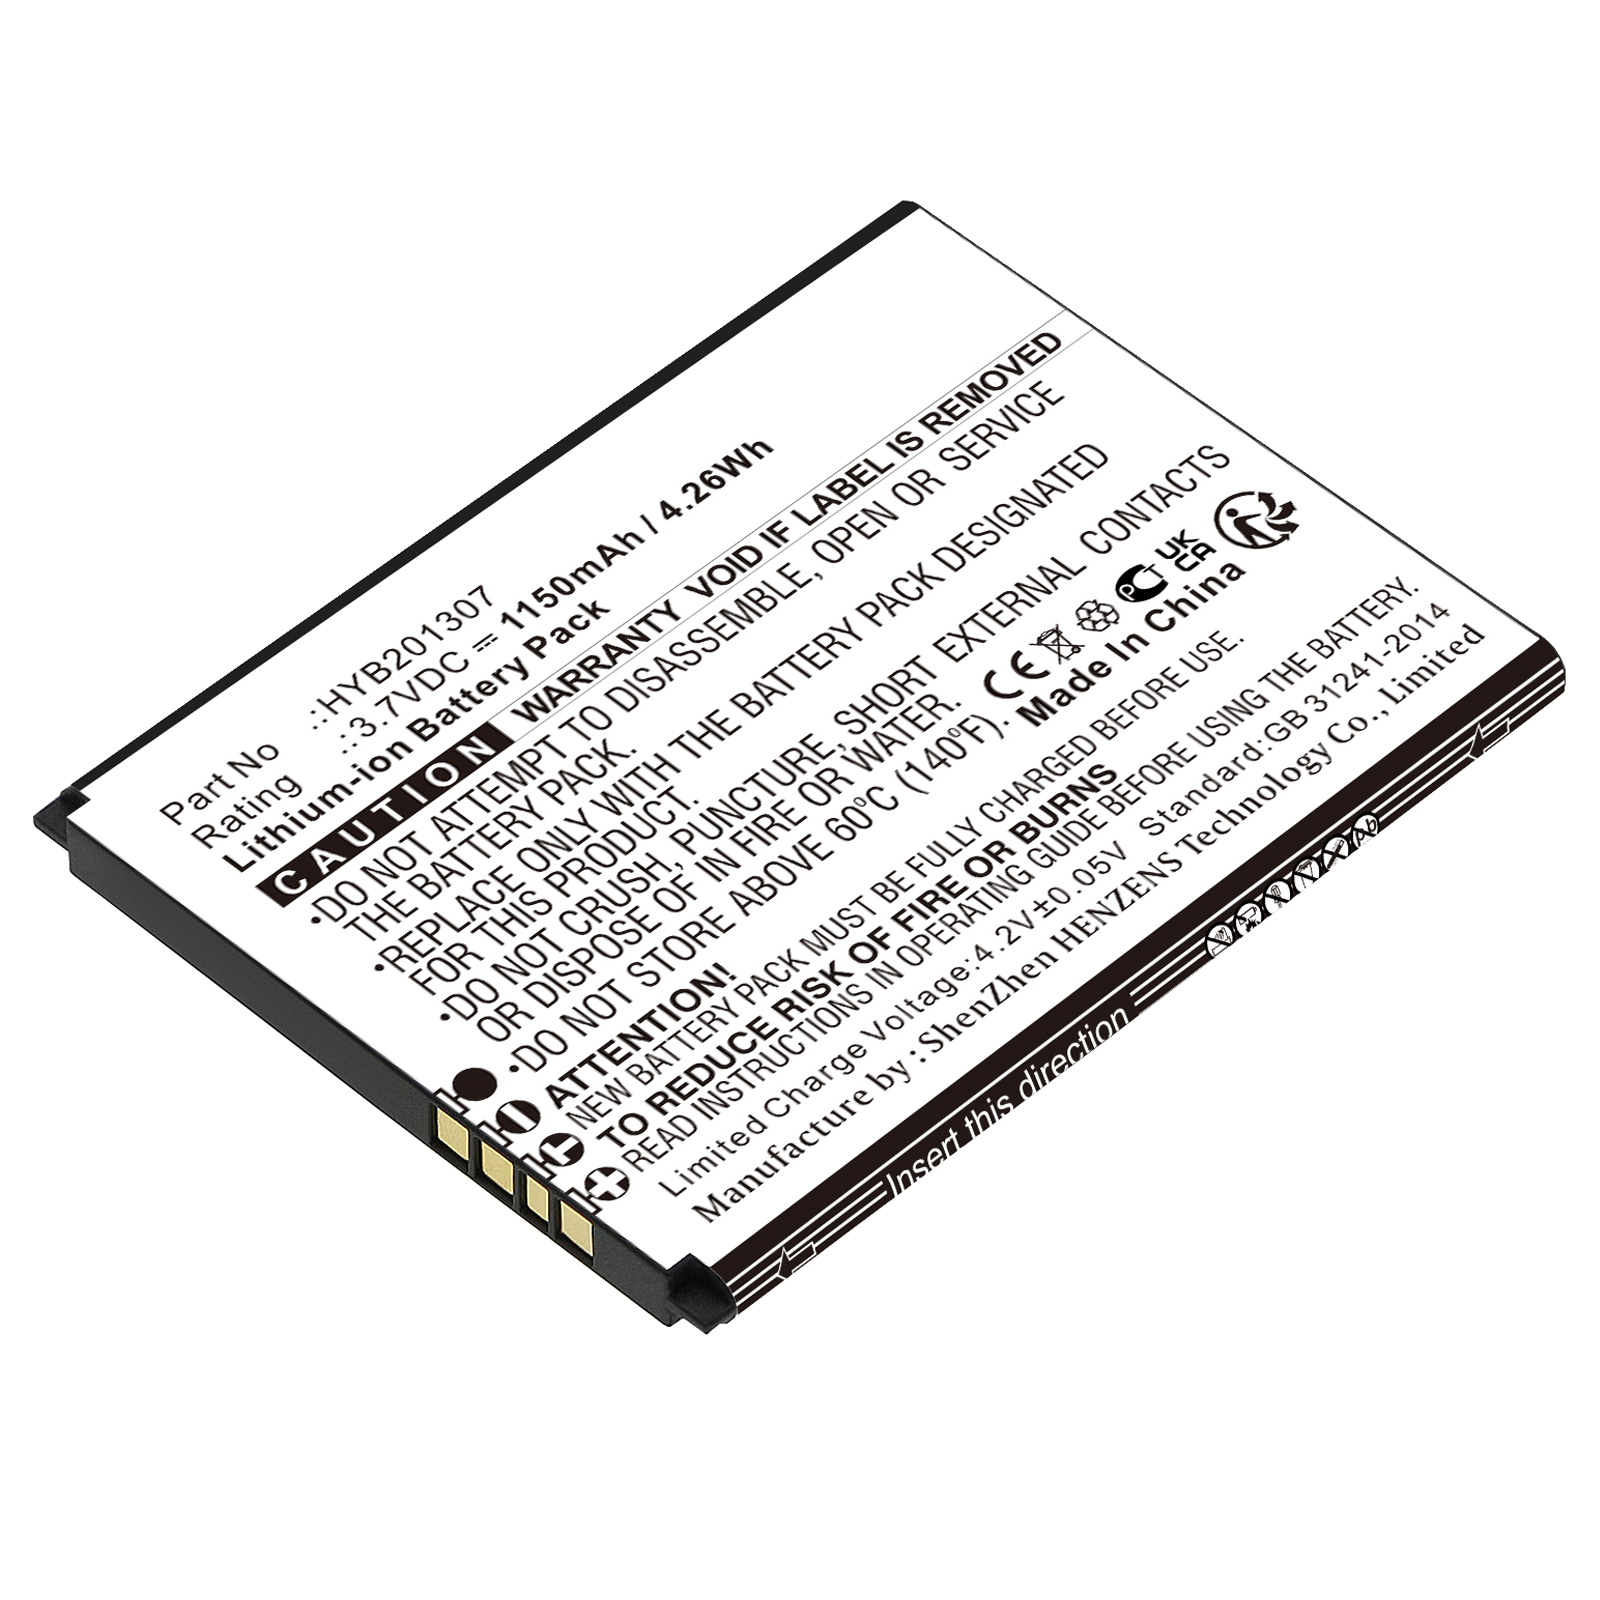 Batteries for UMXCell Phone